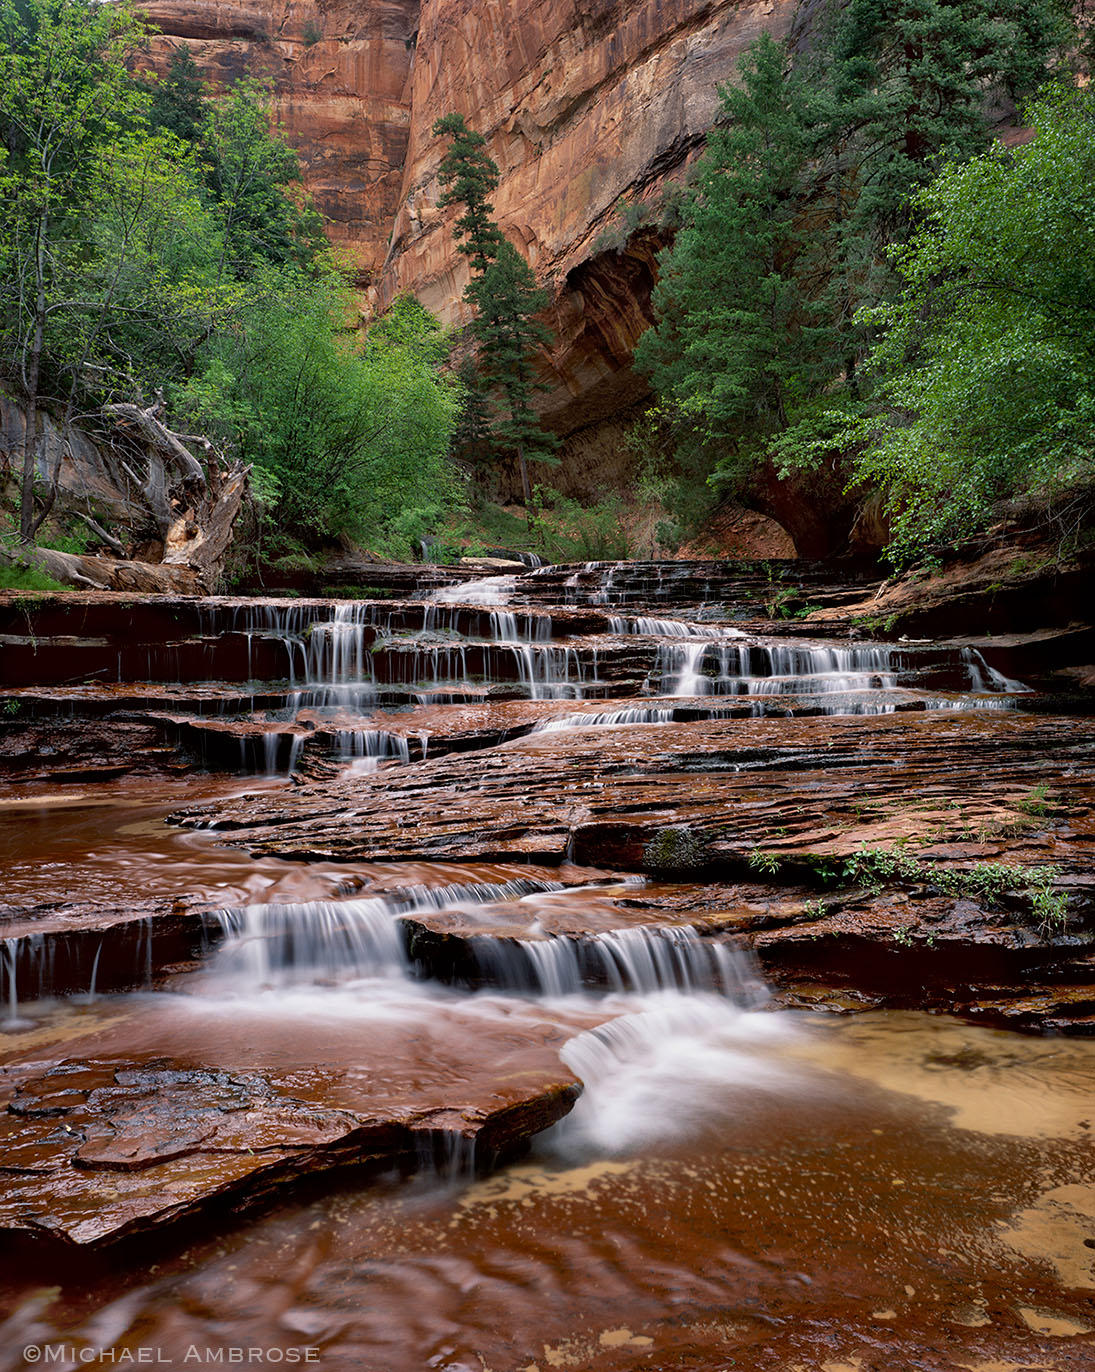 Subway Falls is the beginning of the slot canyon that cradles the Left Fork of North Creek in Zion National Park.